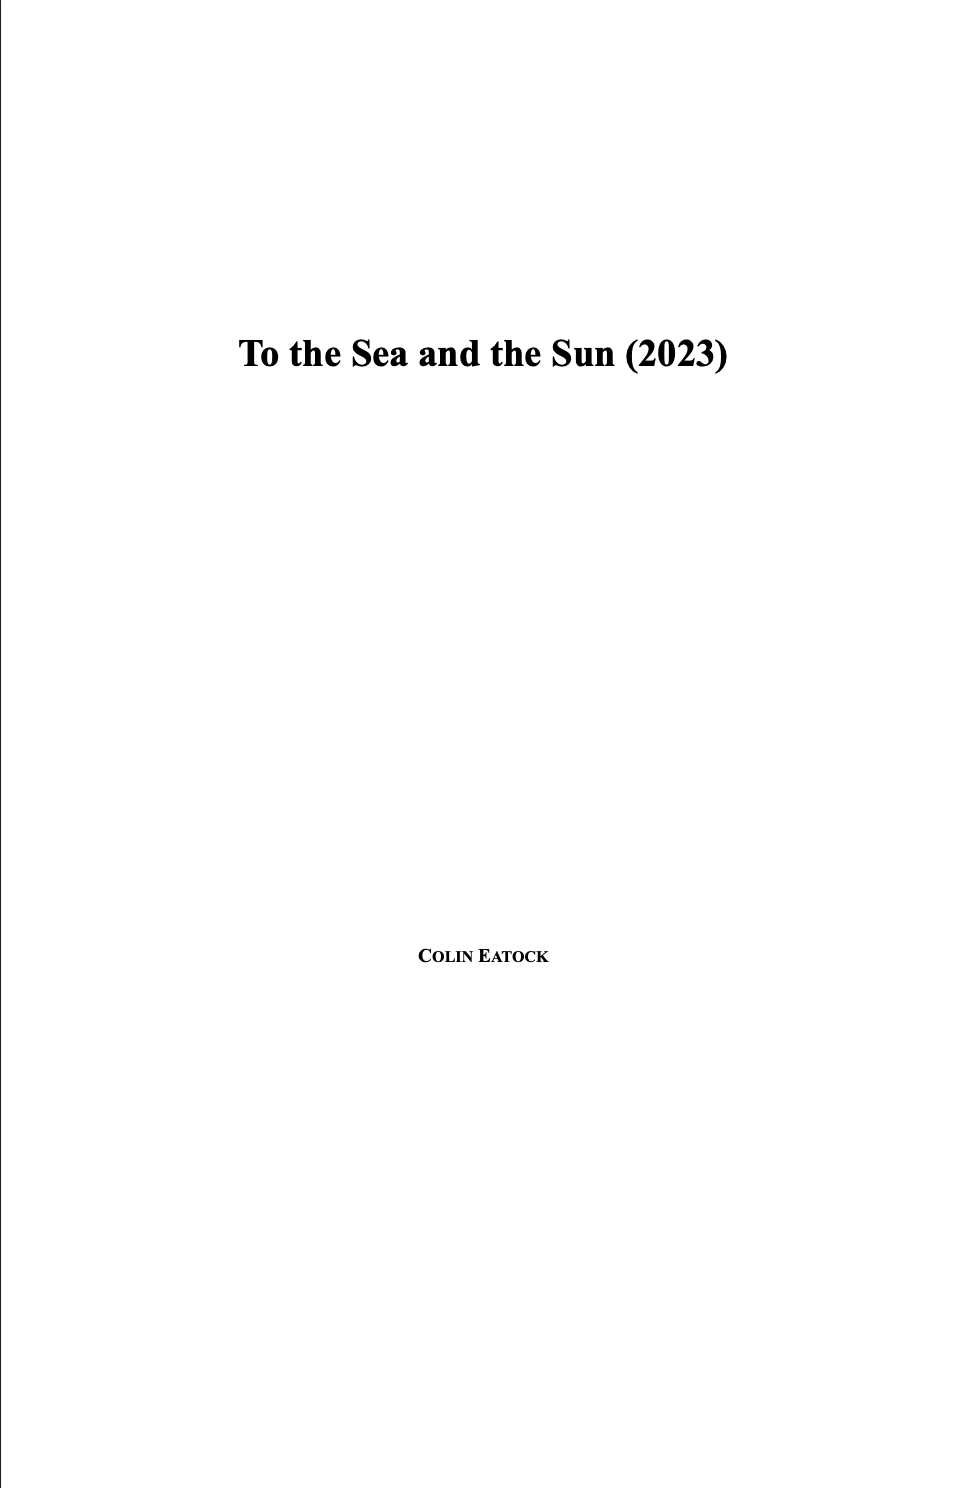 To The Sea And The Sun by Colin Eatock